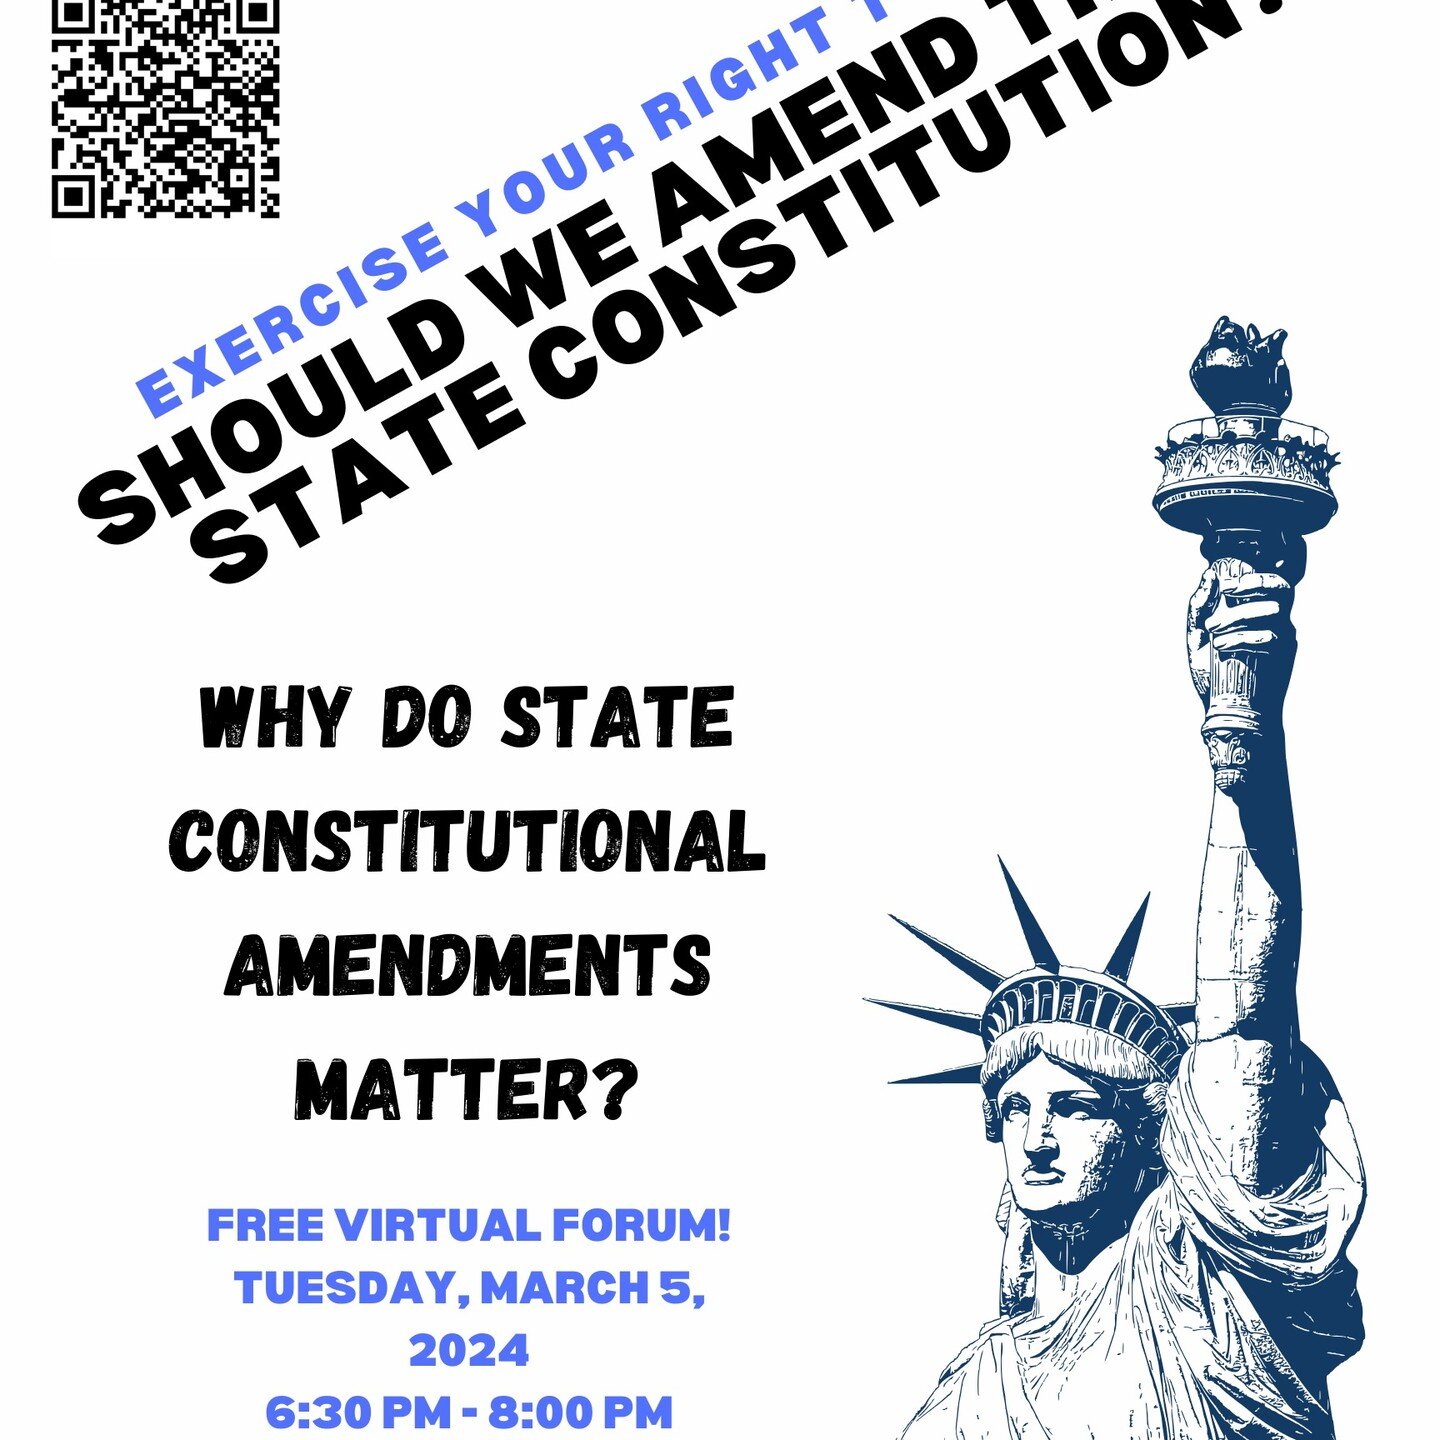 Why Do State Constitutional Amendments Matter?
Tuesday, March 5, 2024 6:30 PM
Hosted by Dane County LWV